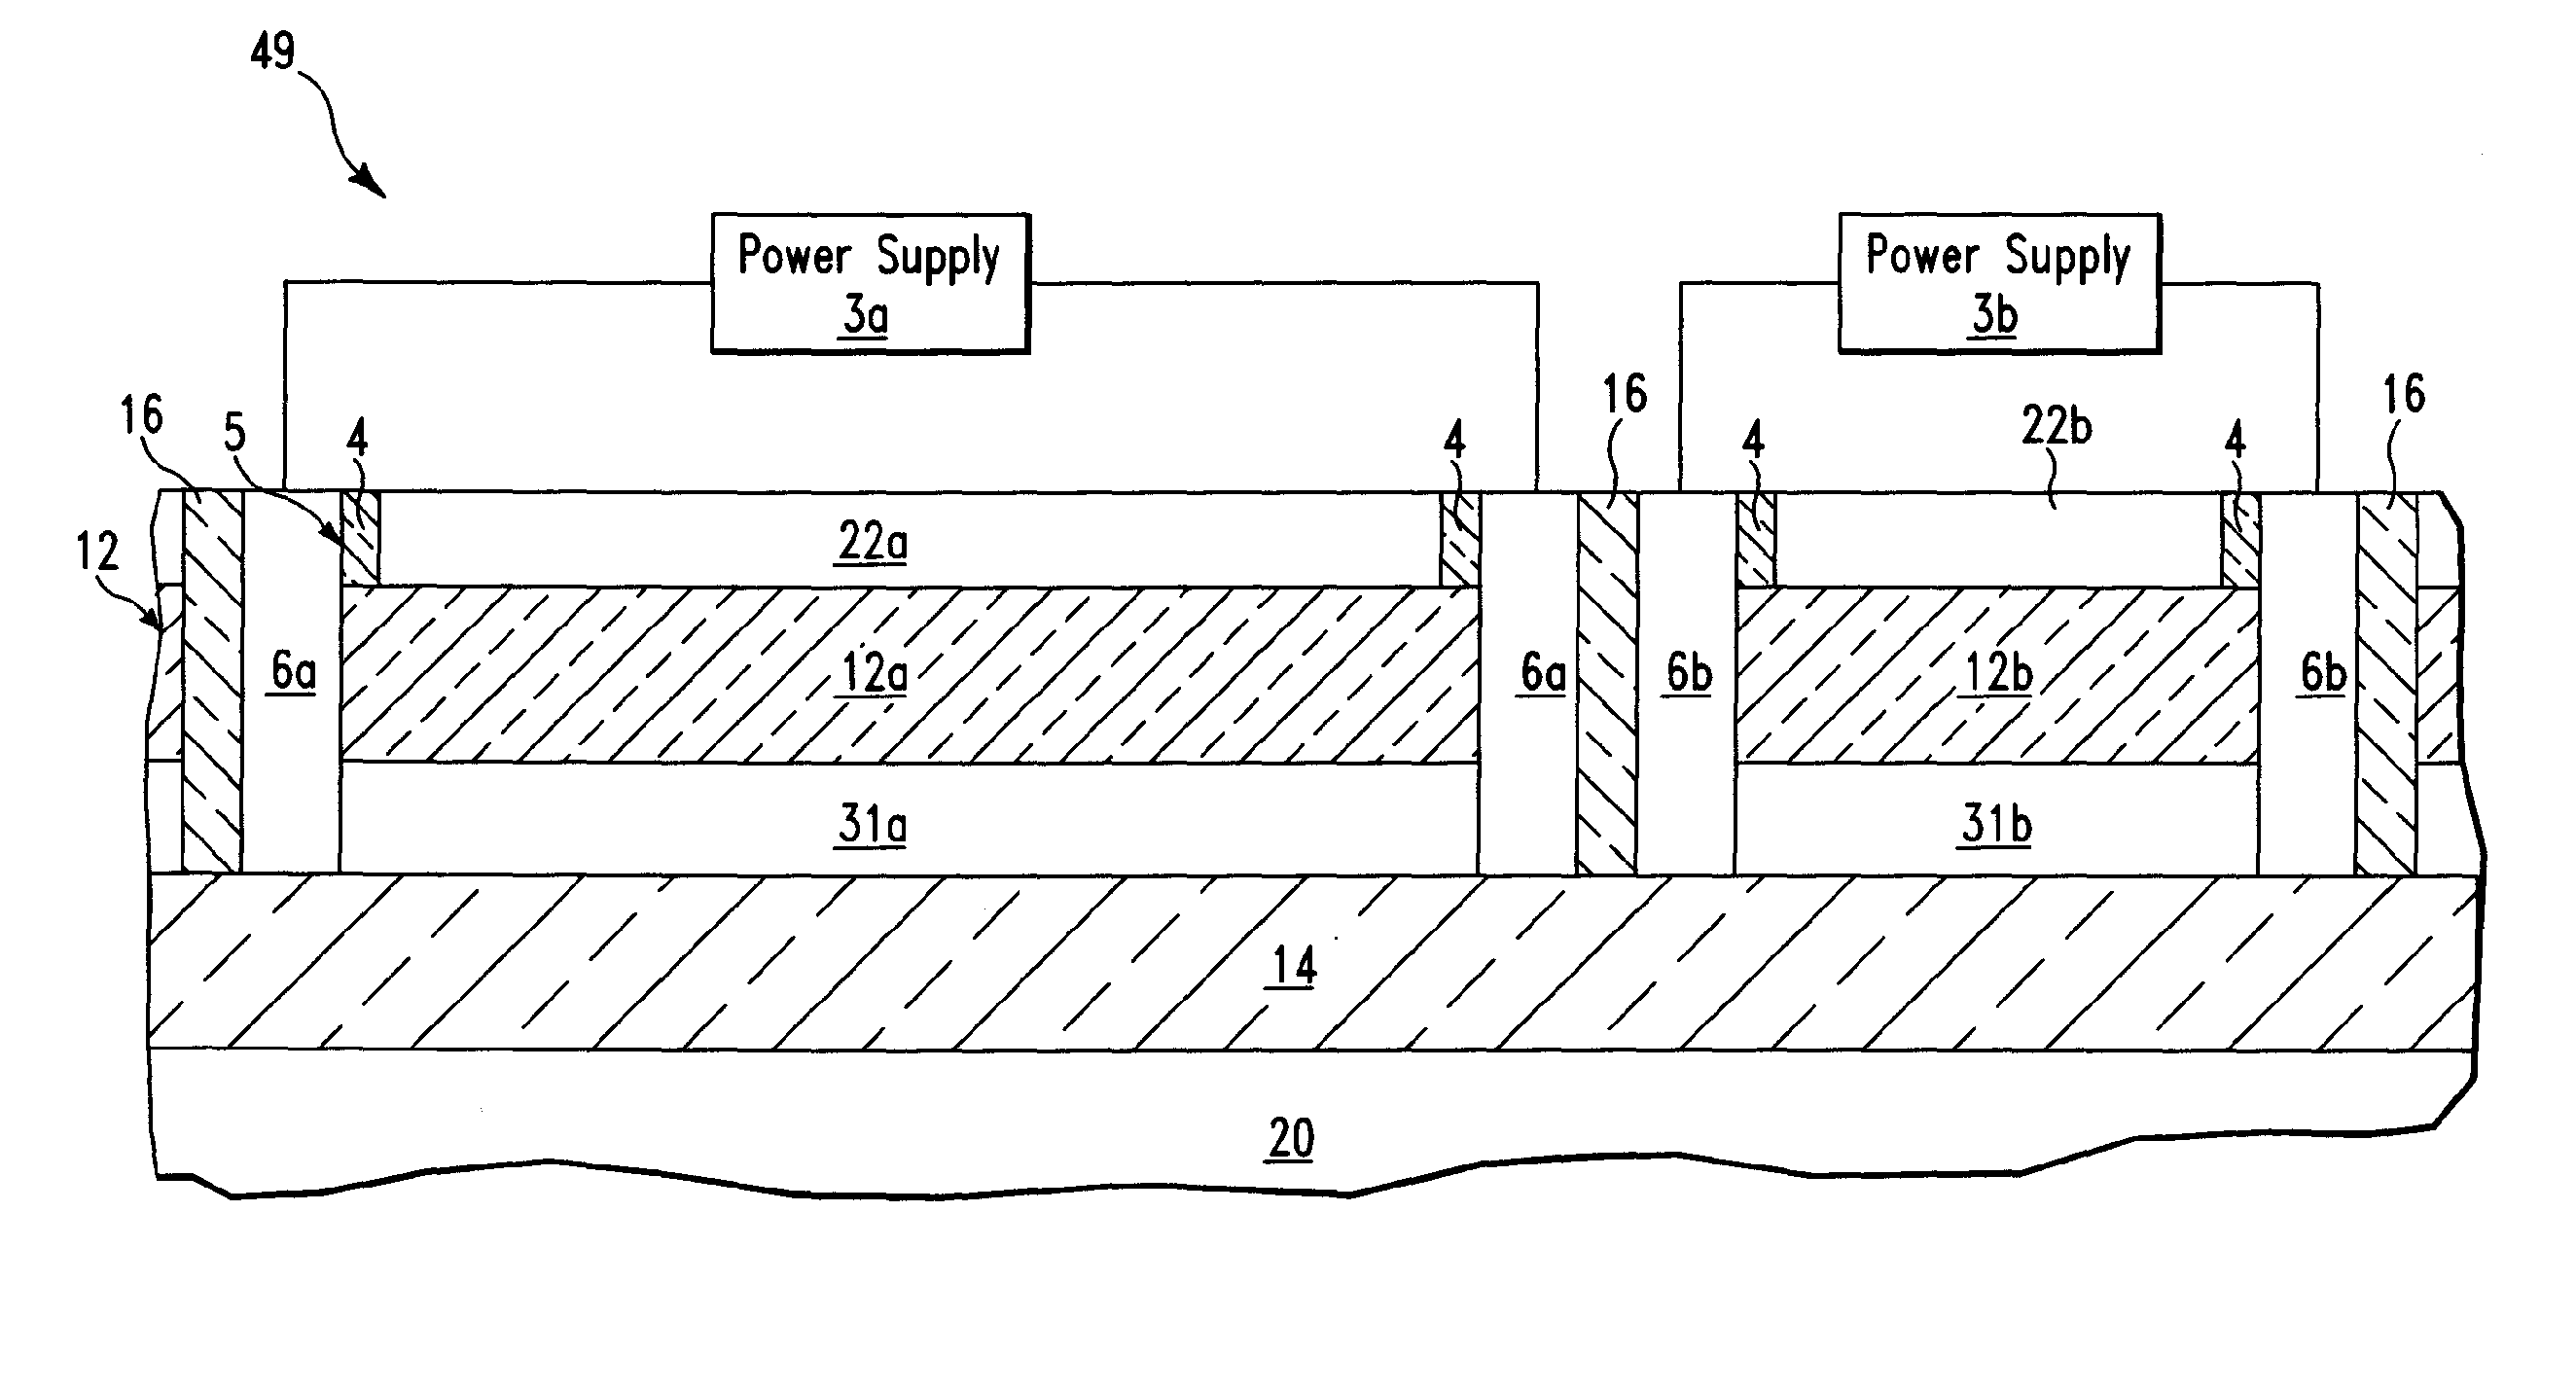 Heater for annealing trapped charge in a semiconductor device